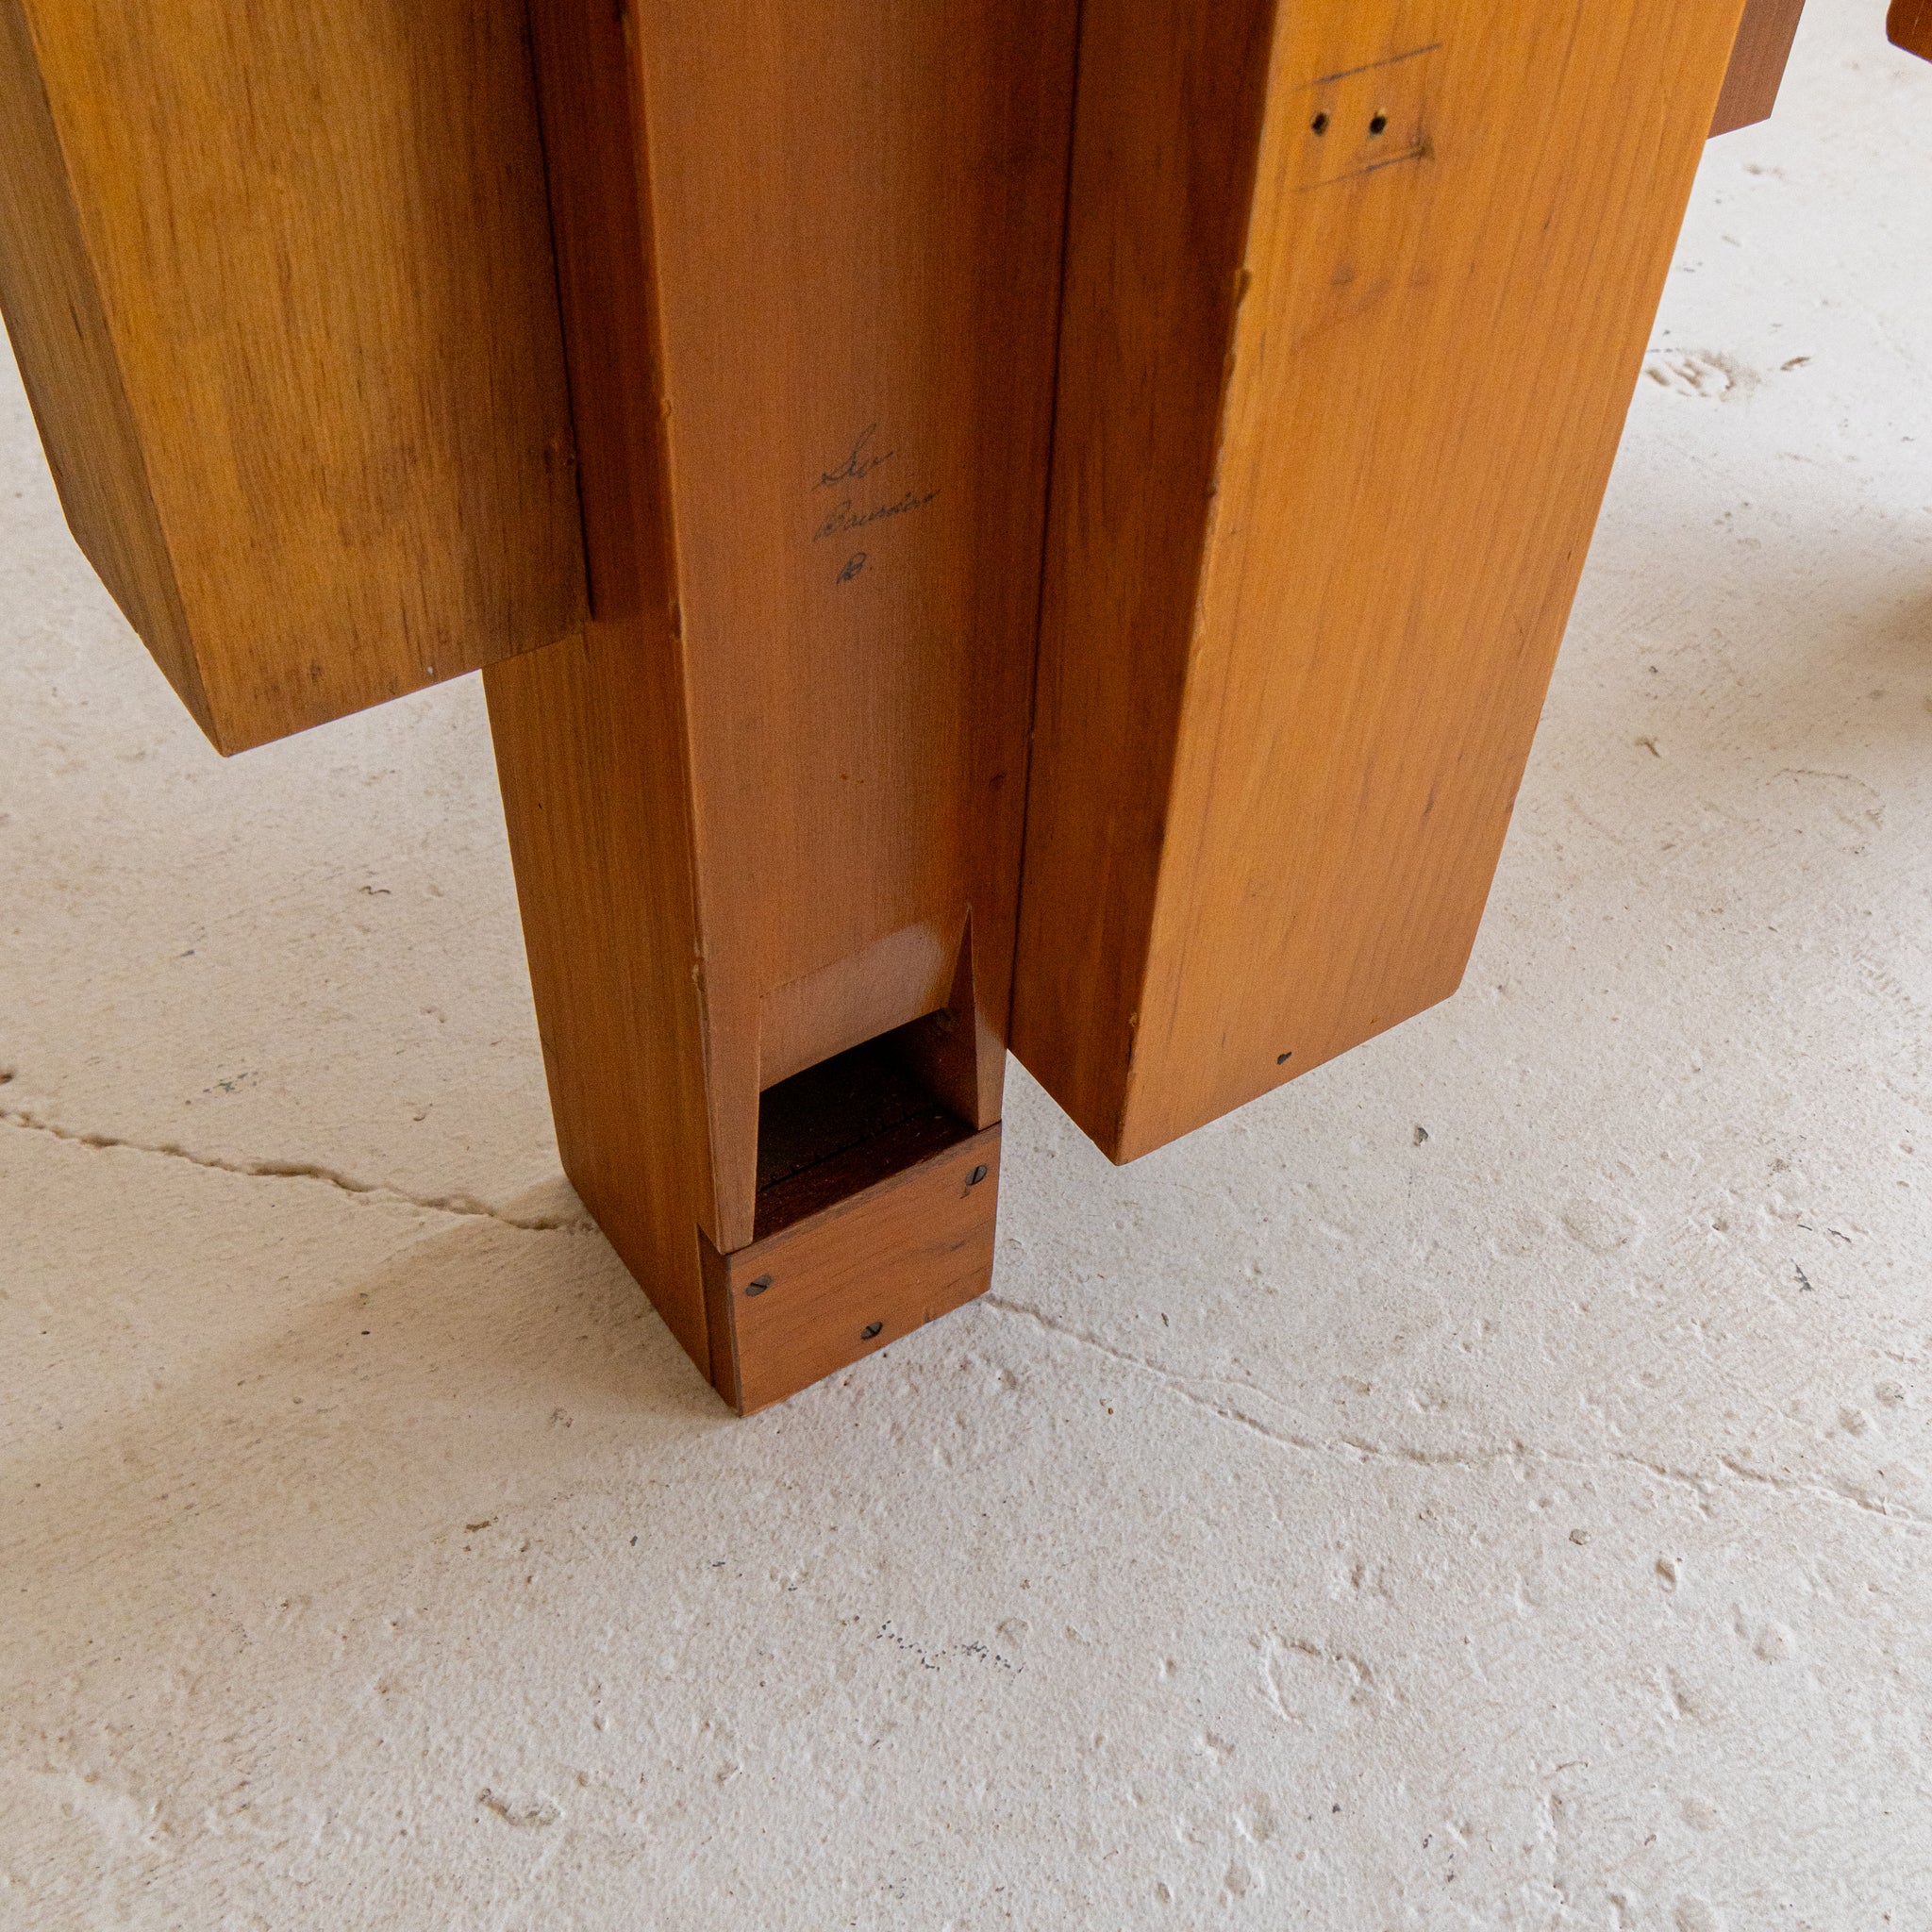 pipe organ entry table 10 close up detail pine reclaimed wood